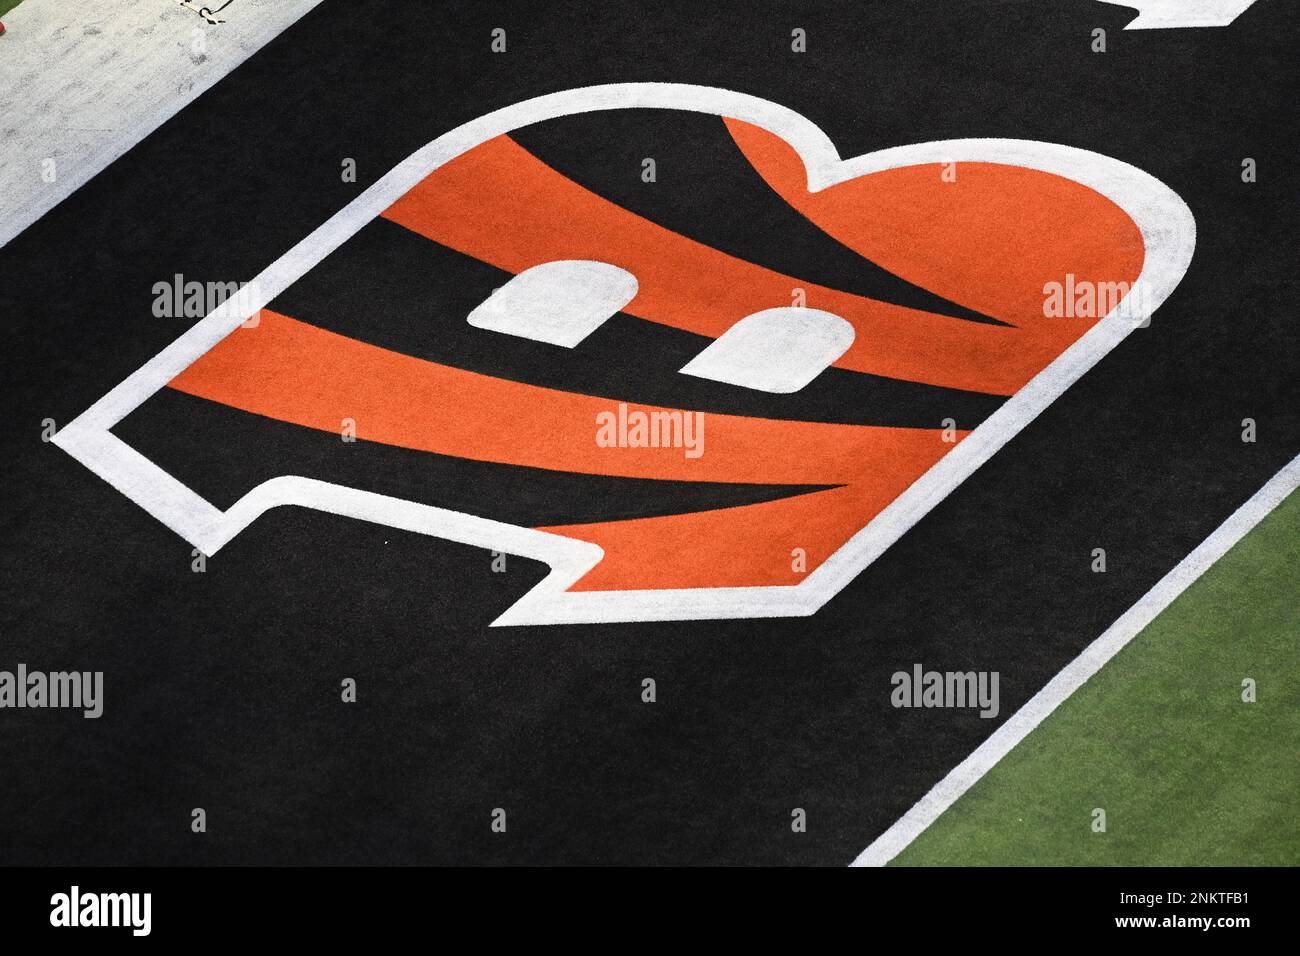 INGLEWOOD, CA - FEBRUARY 13: The Bengals logo painted in the end zone  during warmups for Super Bowl LVI between the Cincinnati Bengals and the  Los Angeles Rams on February 13, 2022,